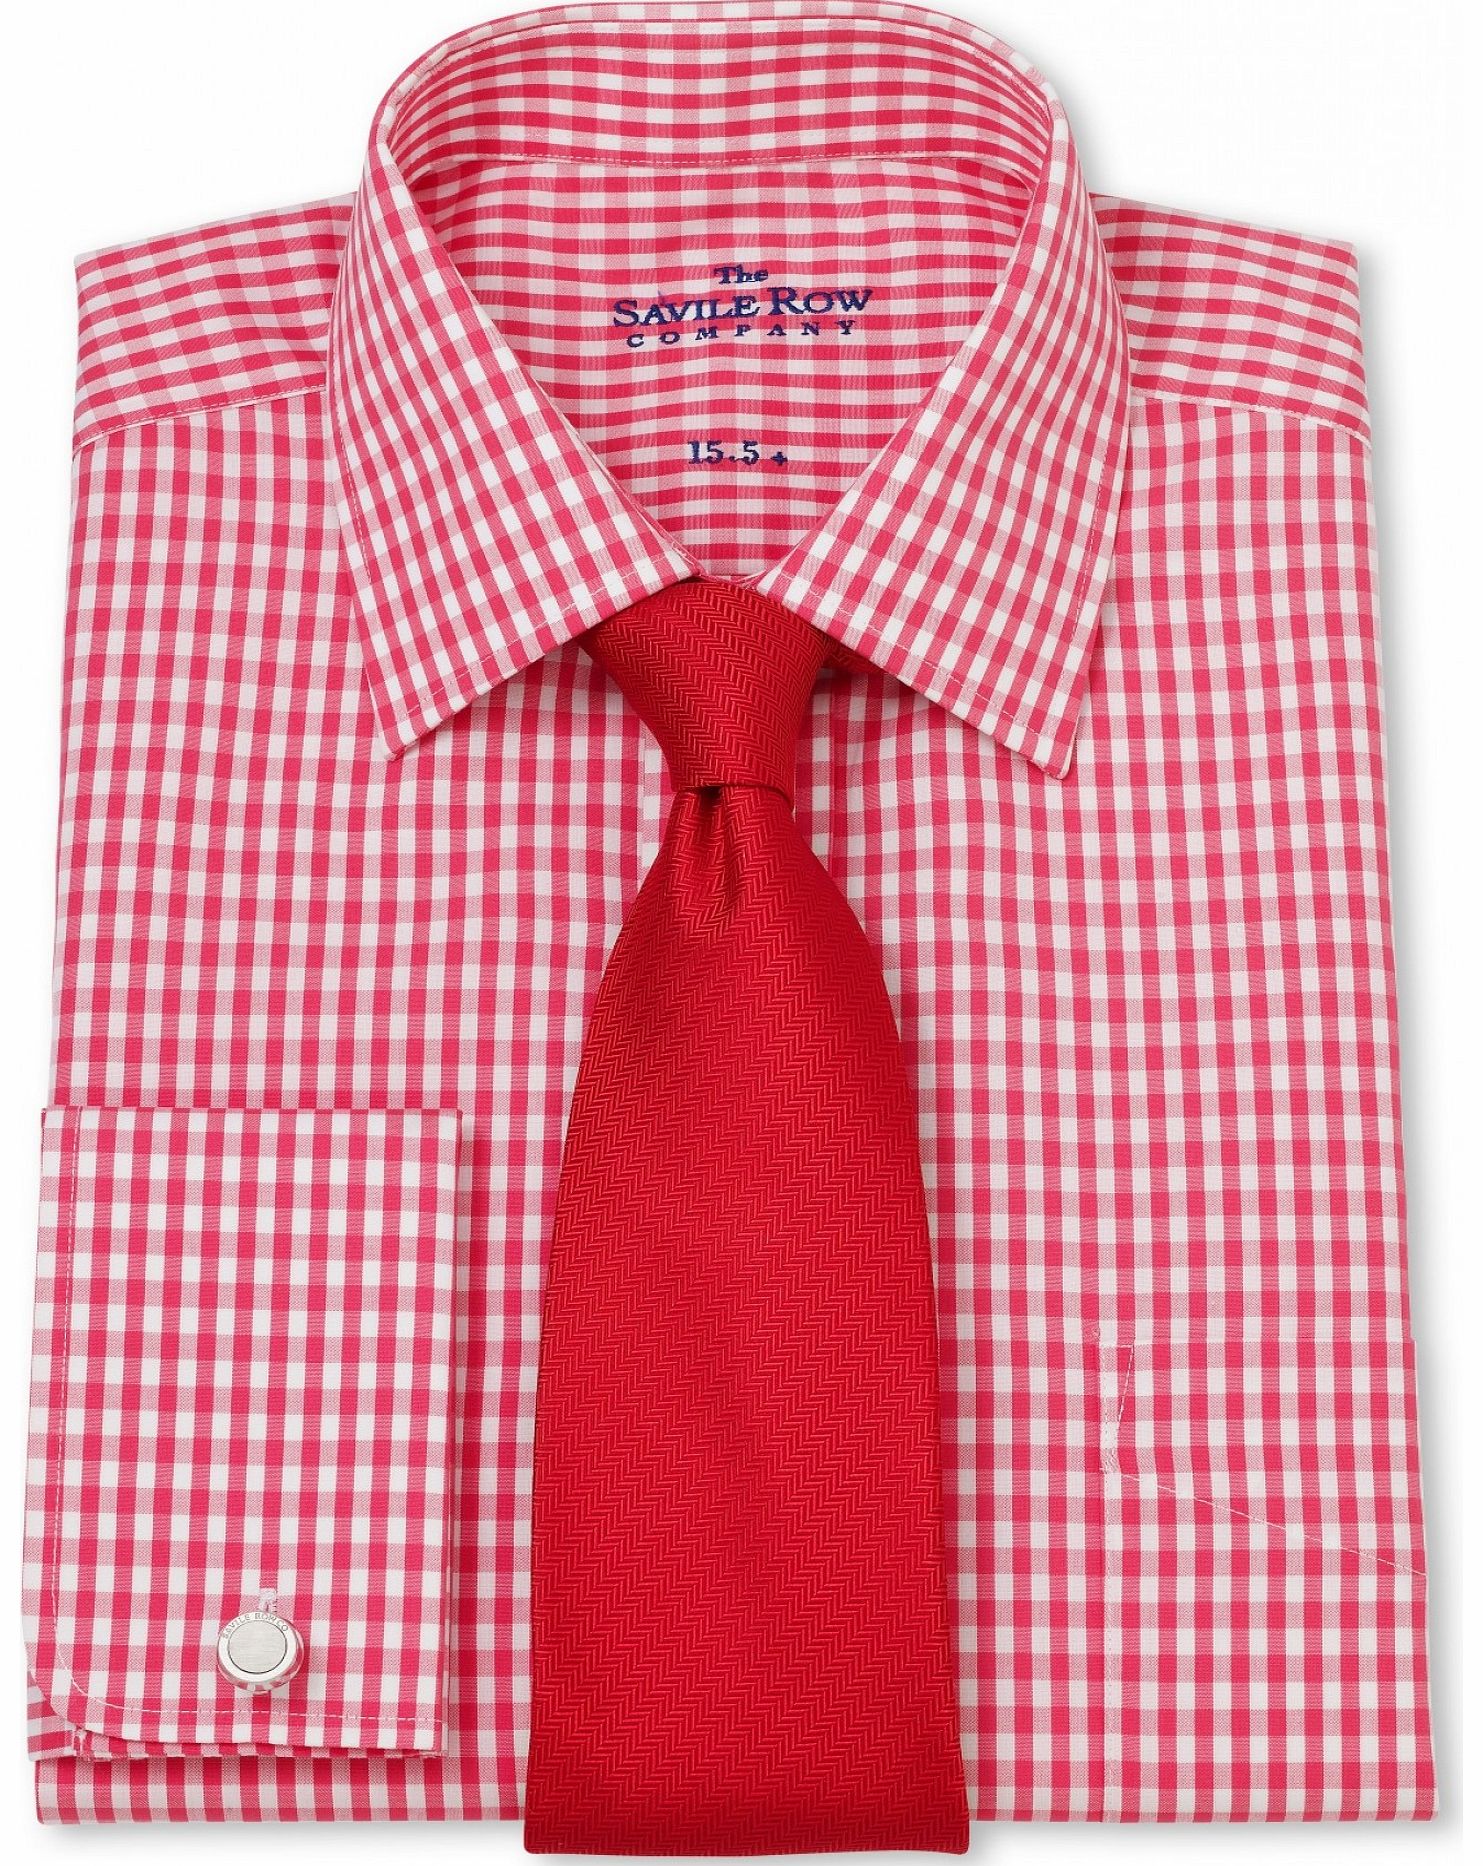 Savile Row Company Pink White Gingham Check Classic Fit Shirt 20``